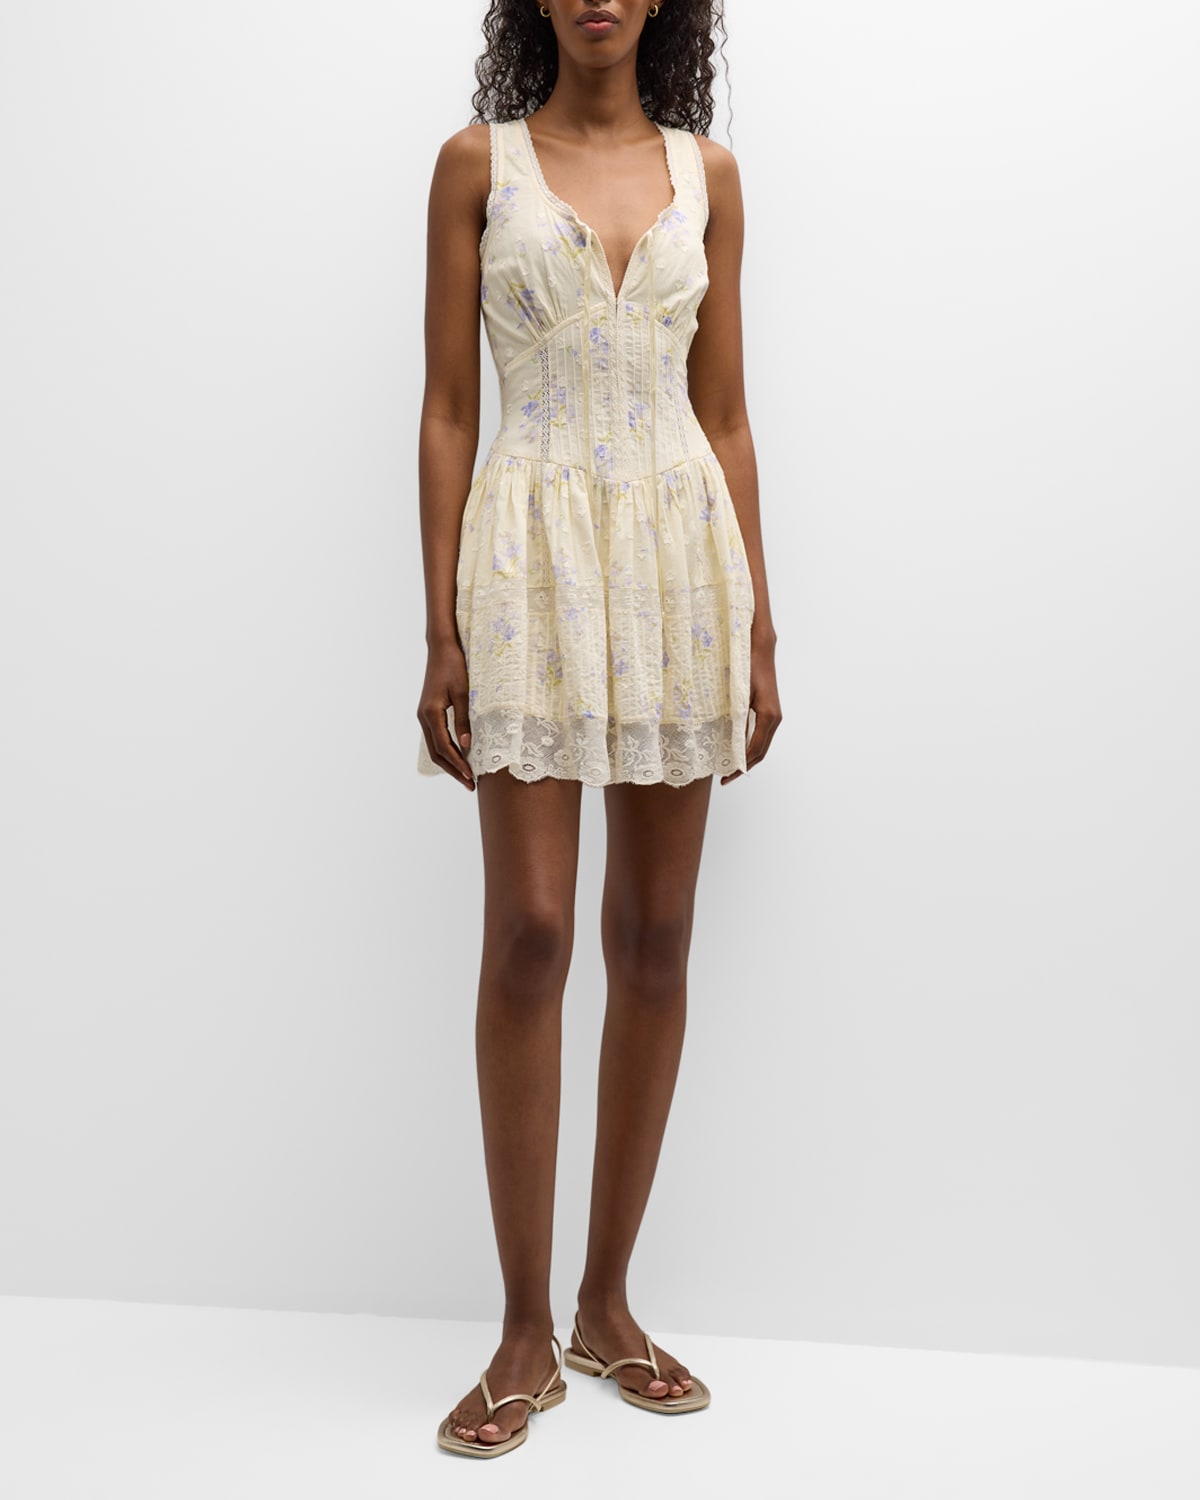 LOVESHACKFANCY CERONNE SLEEVELESS EMBROIDERED FLORAL LACE MINI DRESS